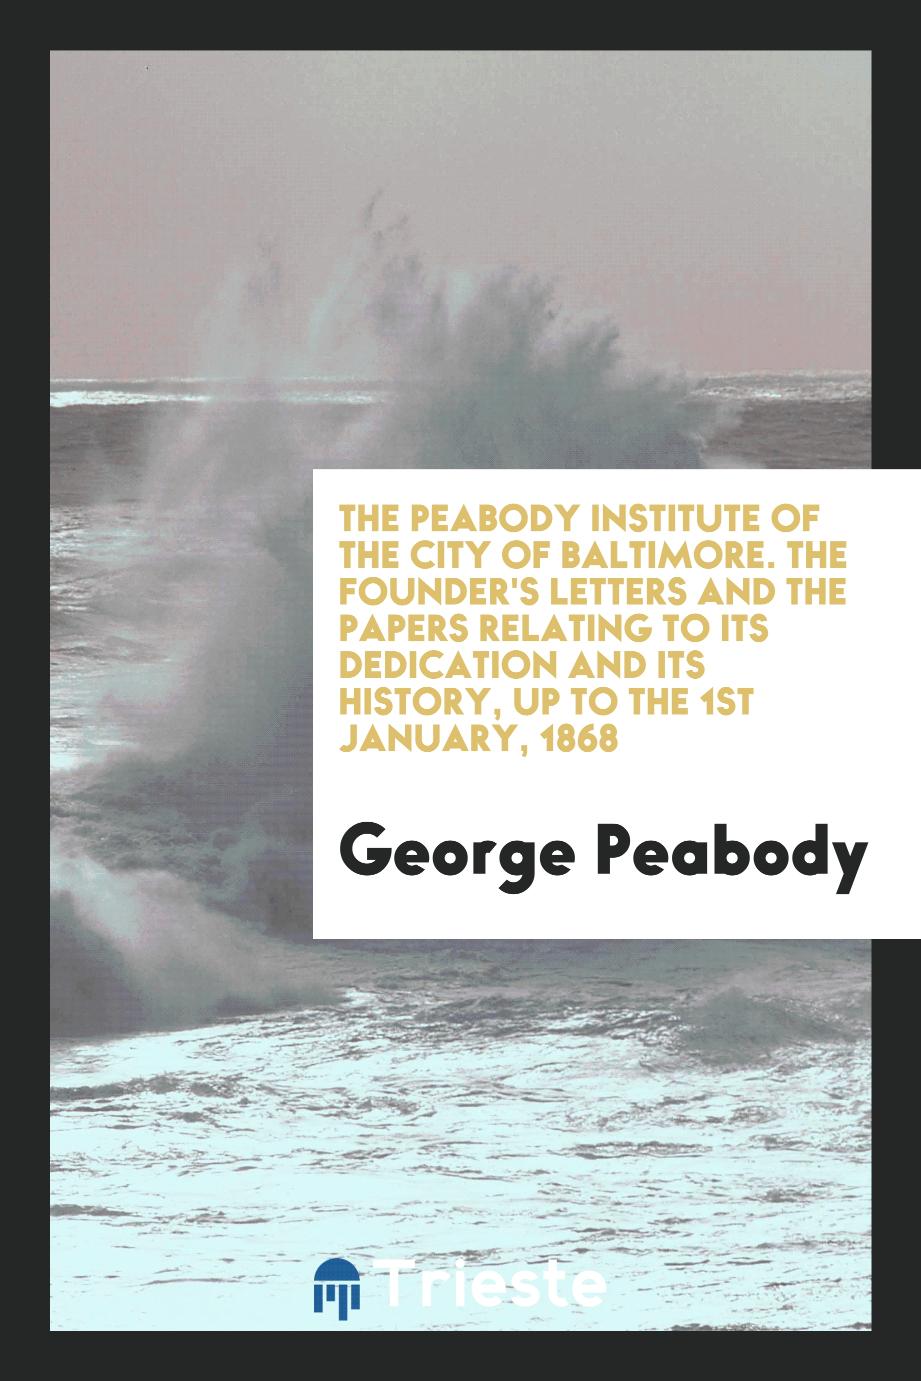 The Peabody Institute of the City of Baltimore. The Founder's Letters and the Papers Relating to Its Dedication and Its History, Up to the 1st January, 1868